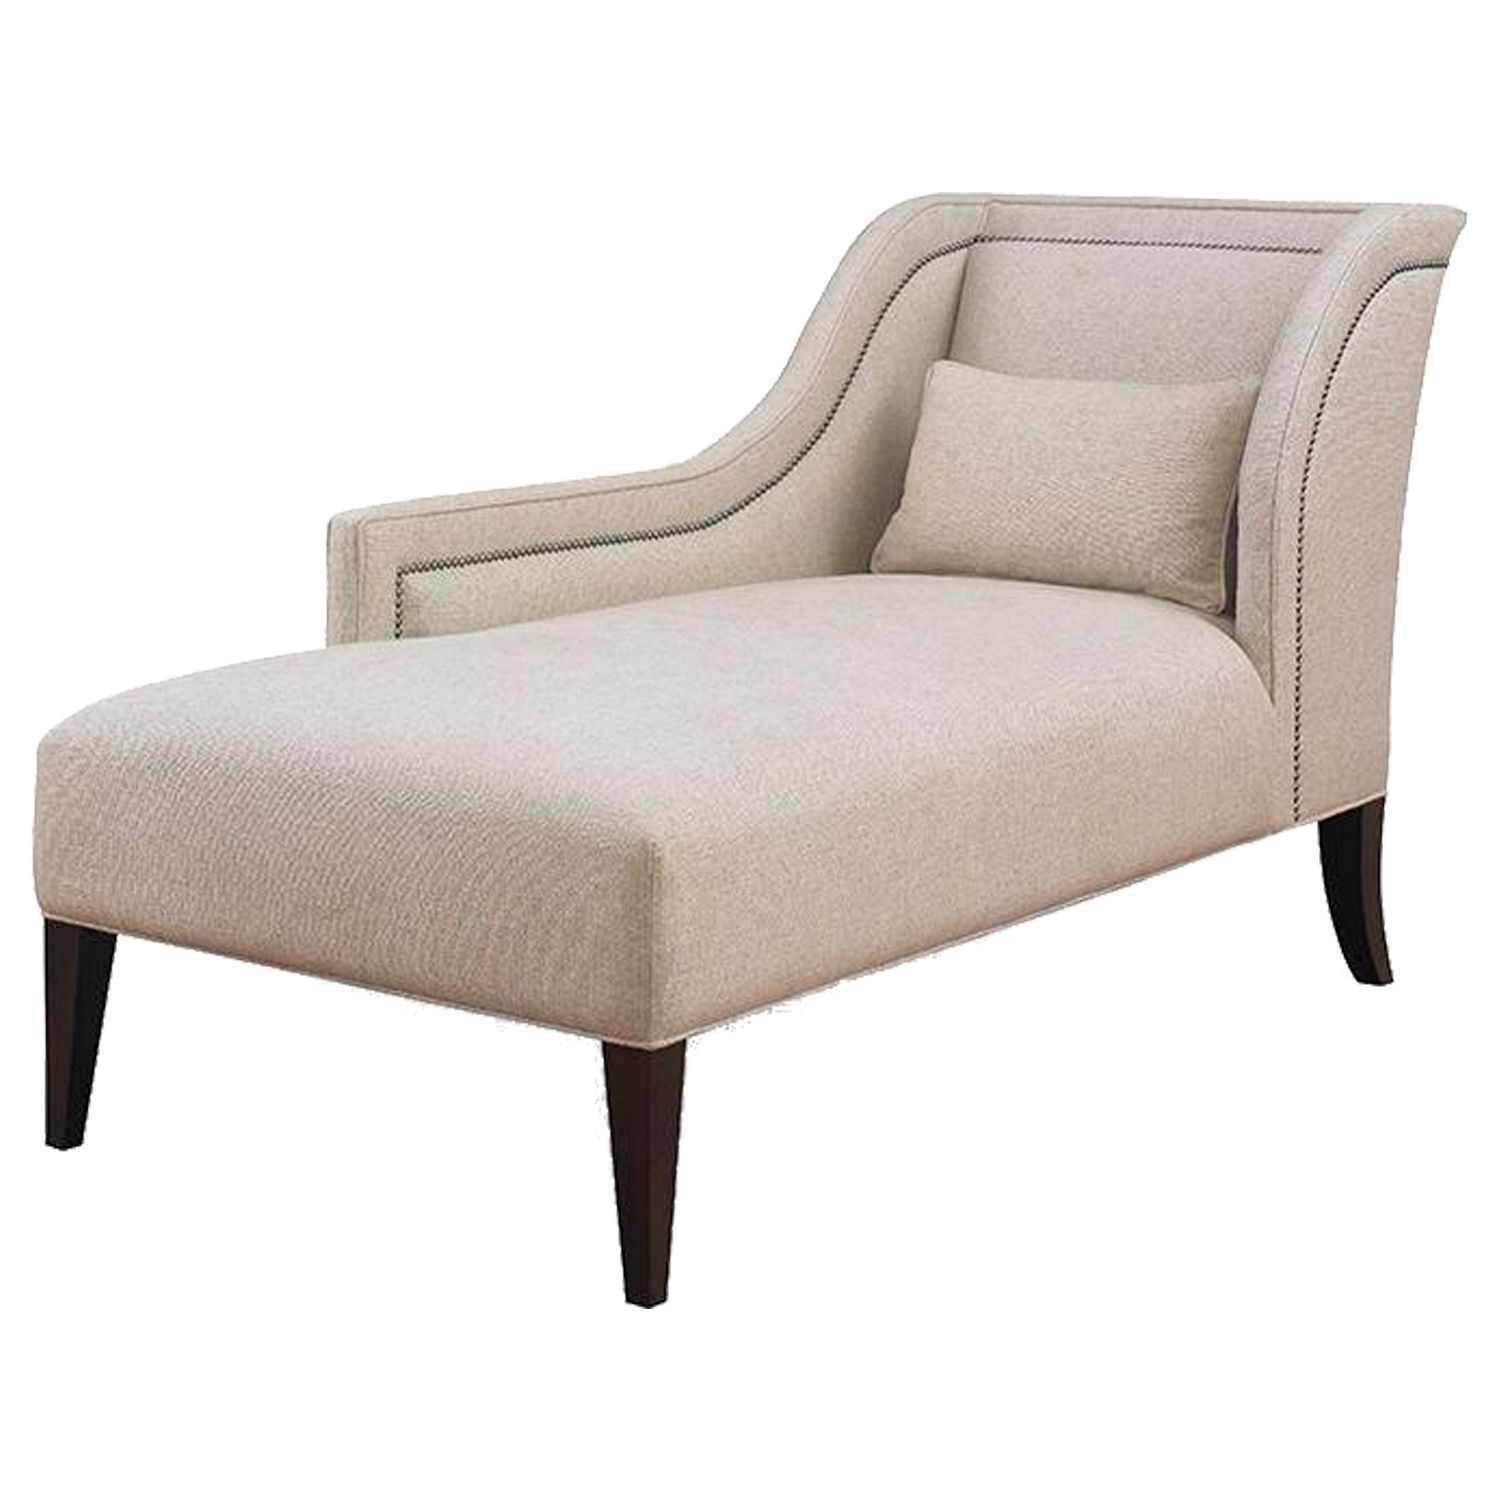 Buy Pasadena One Arm Chaisekravet – Made To Order Designer Regarding Recent Chaise Lounge Chairs Without Arms (View 3 of 15)